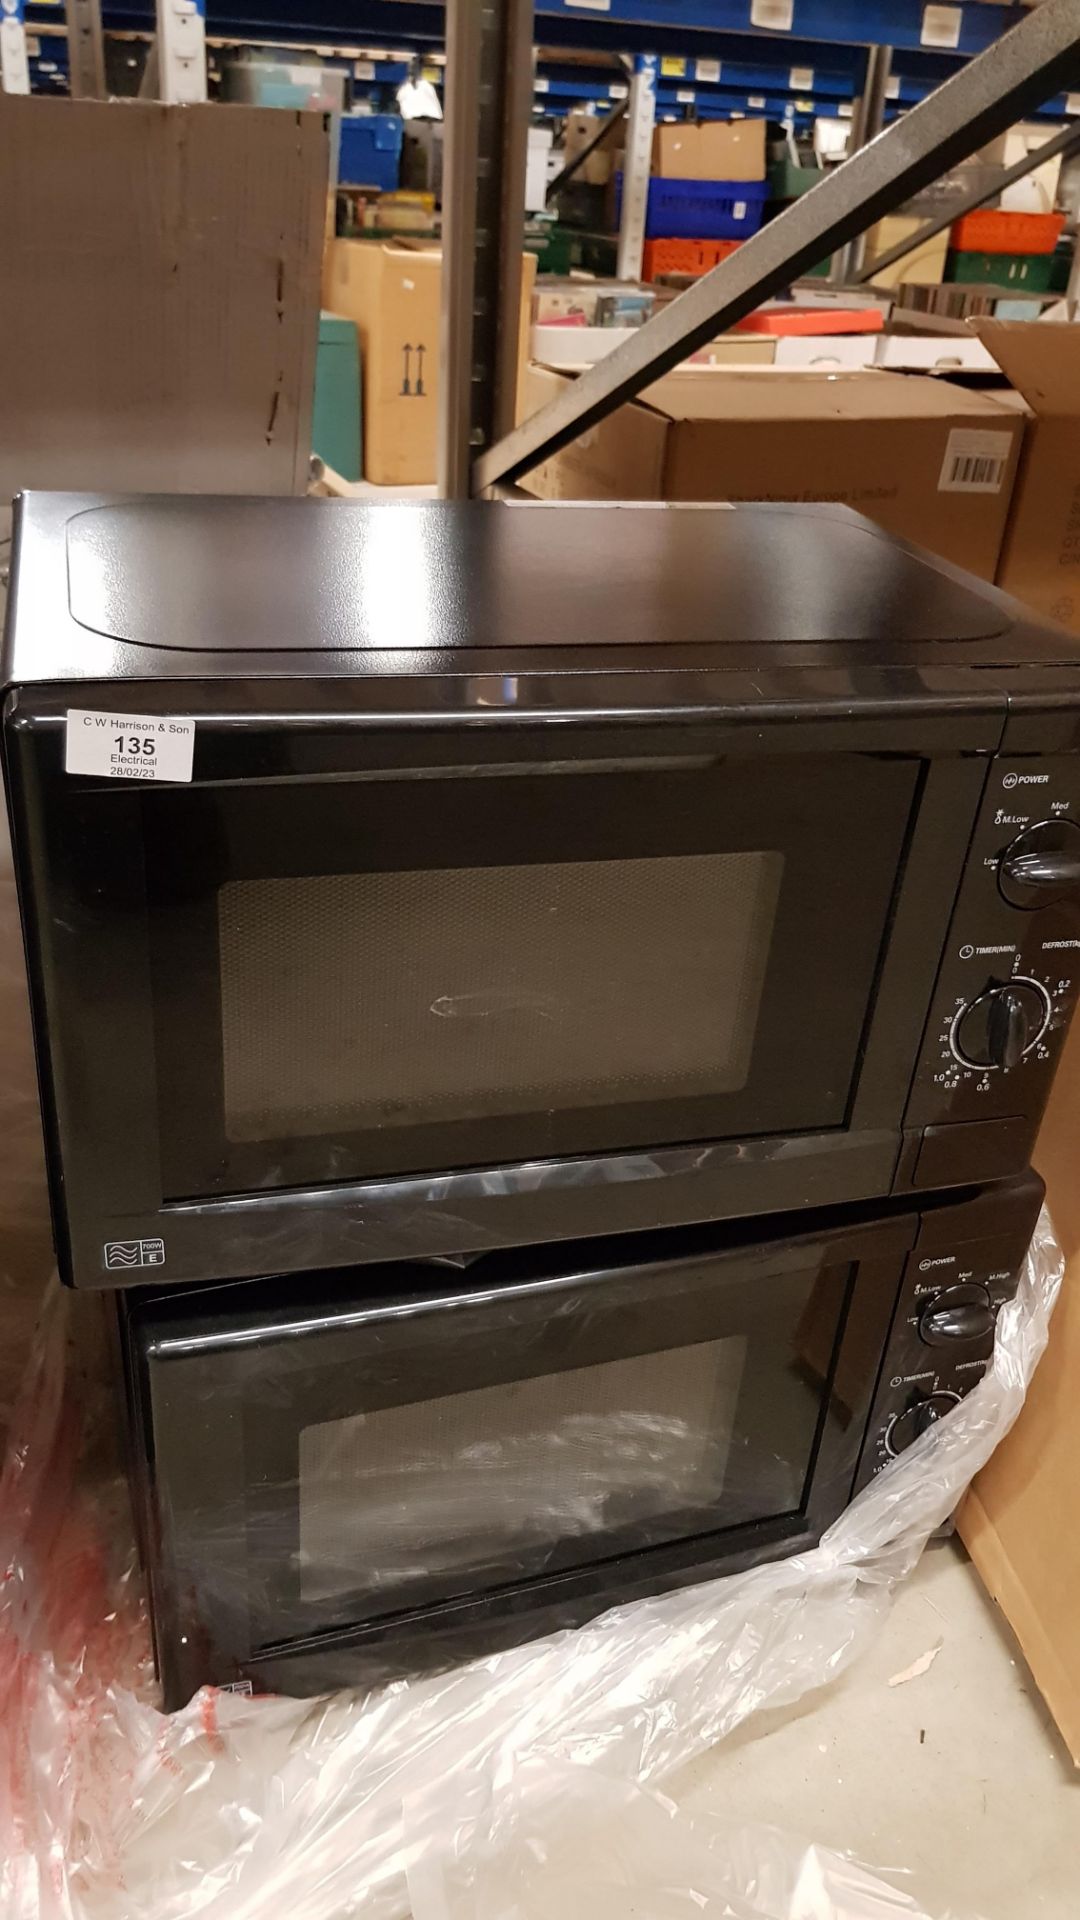 2x Microwave Oven Black 700W 17L (GMM001NB-18) RRP £60 Each. (Spares Or Repairs). - Image 2 of 8